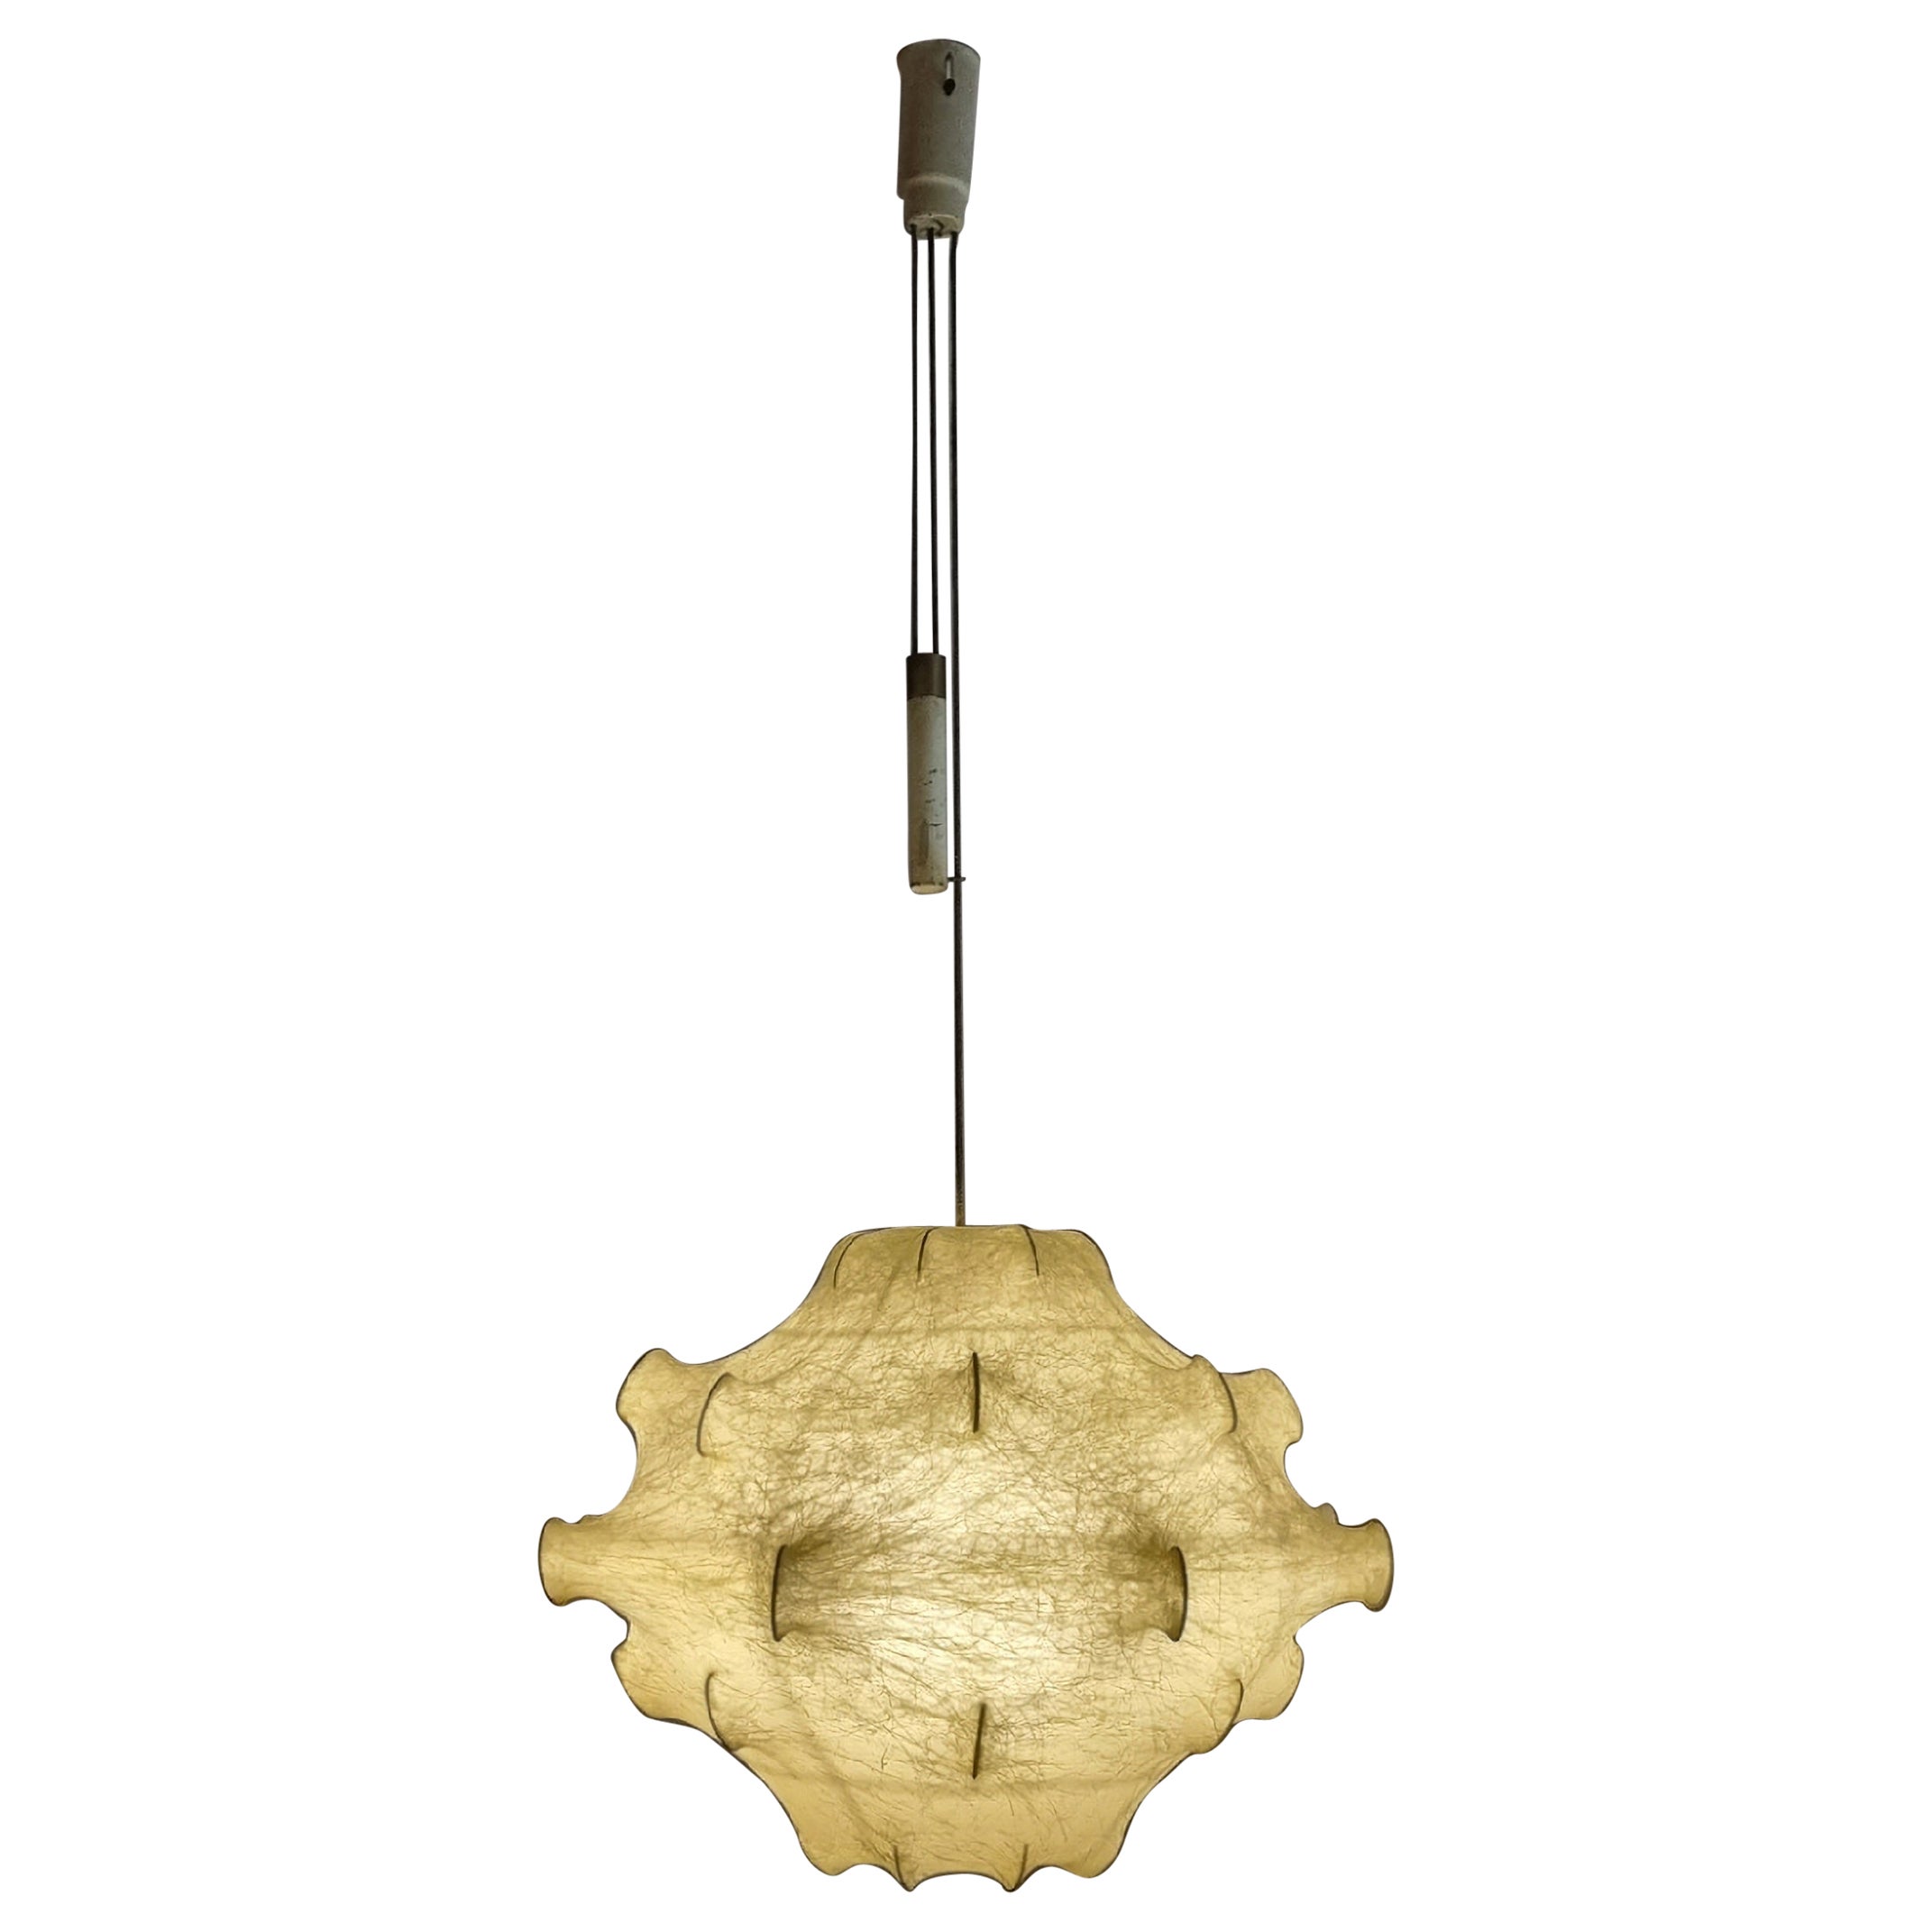 Large Taraxacum 2 by Achille and Pier Giacomo Castiglioni for Flos 1960 For Sale